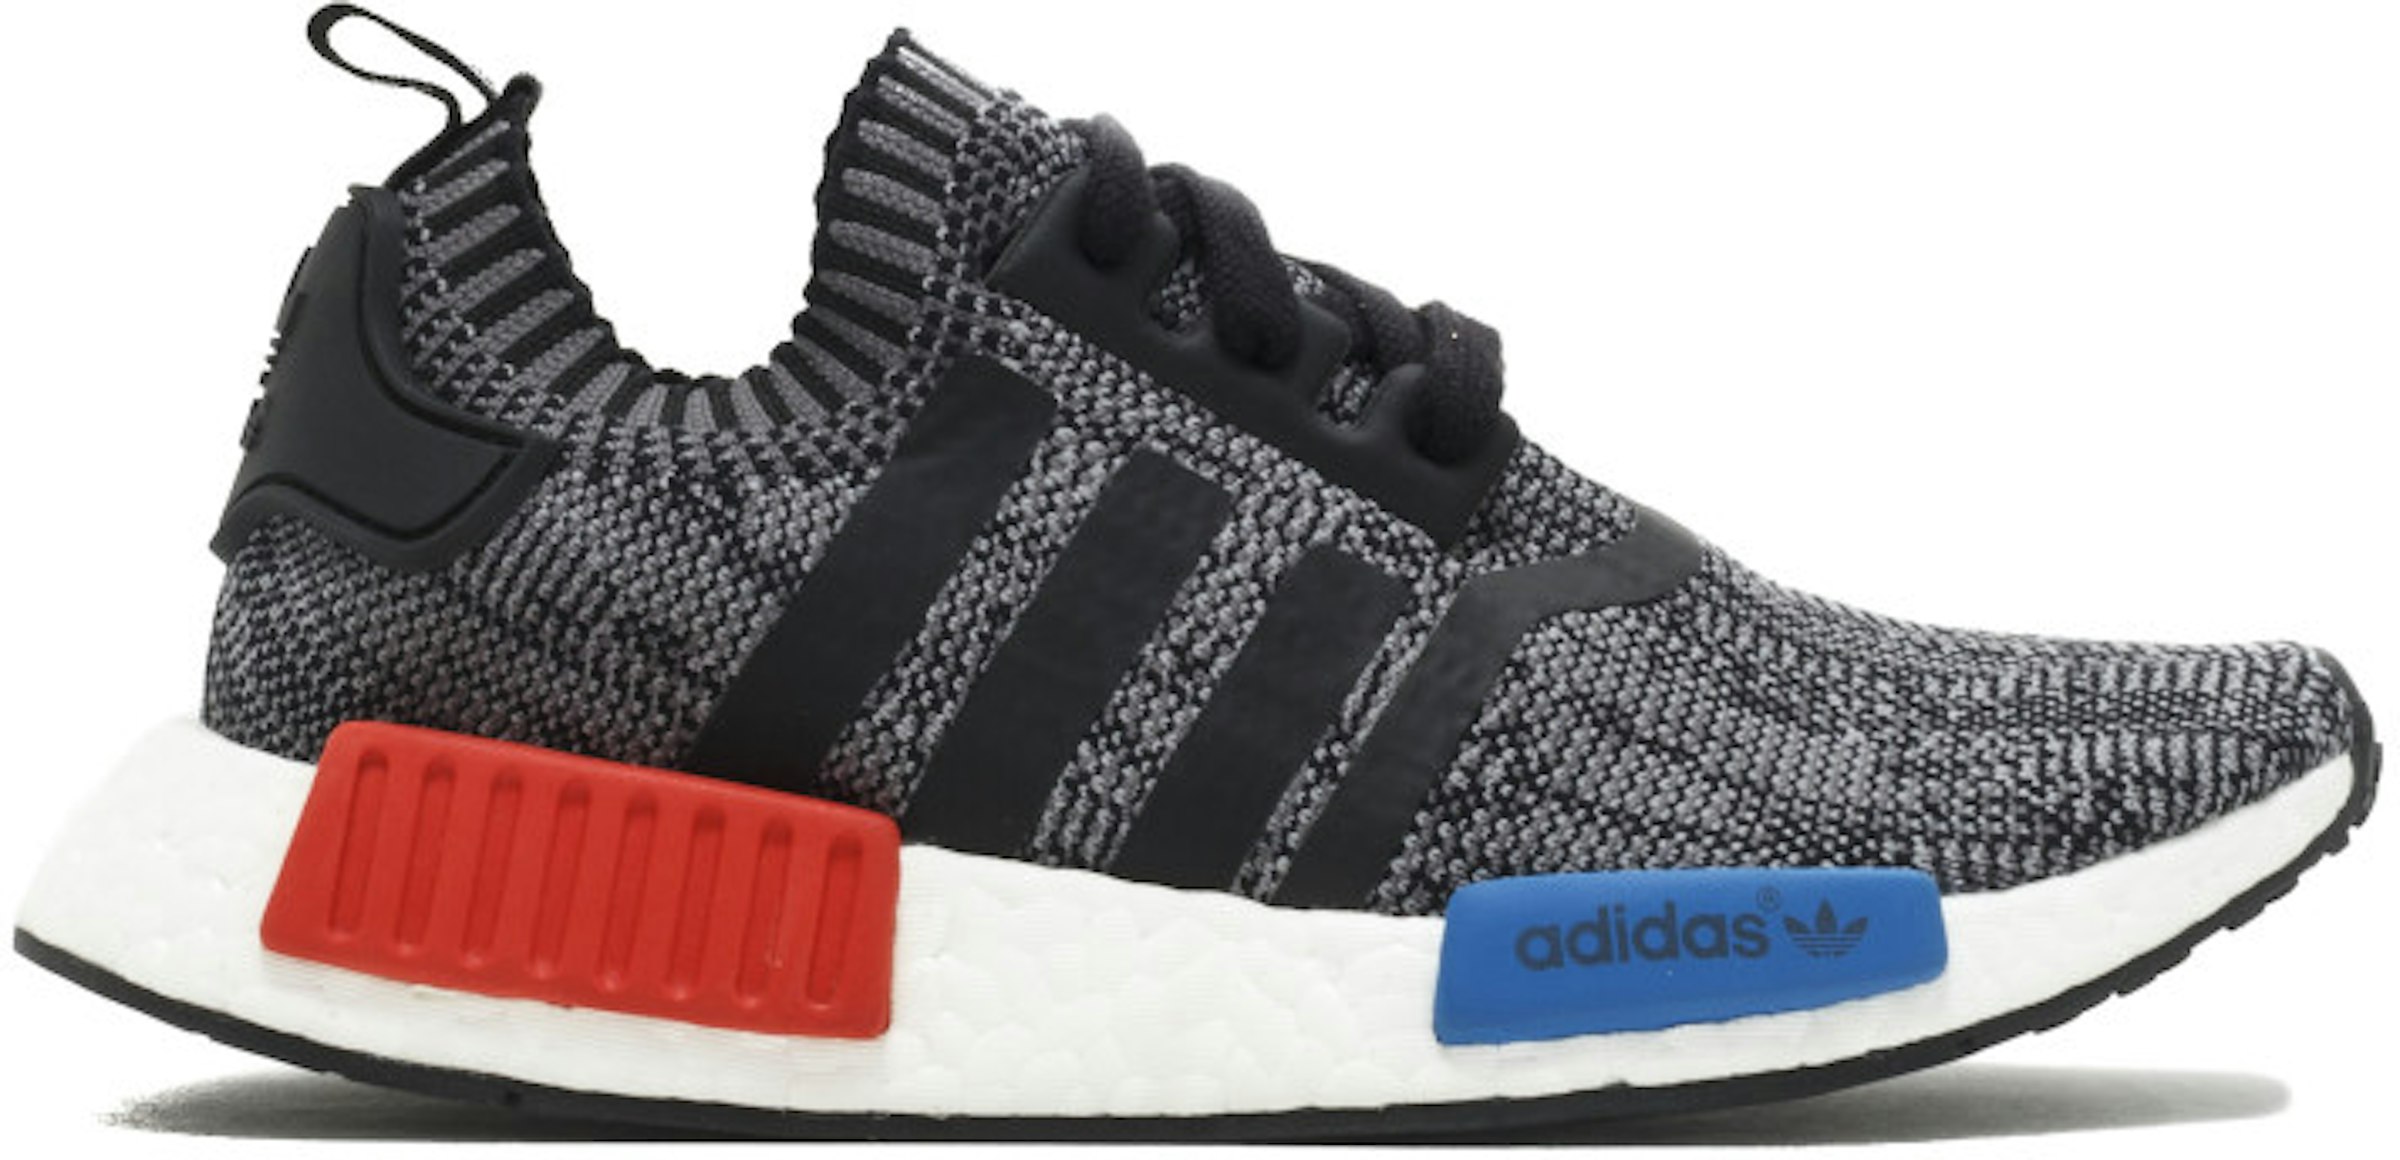 adidas NMD R1 Friends and Family - N00001 - US